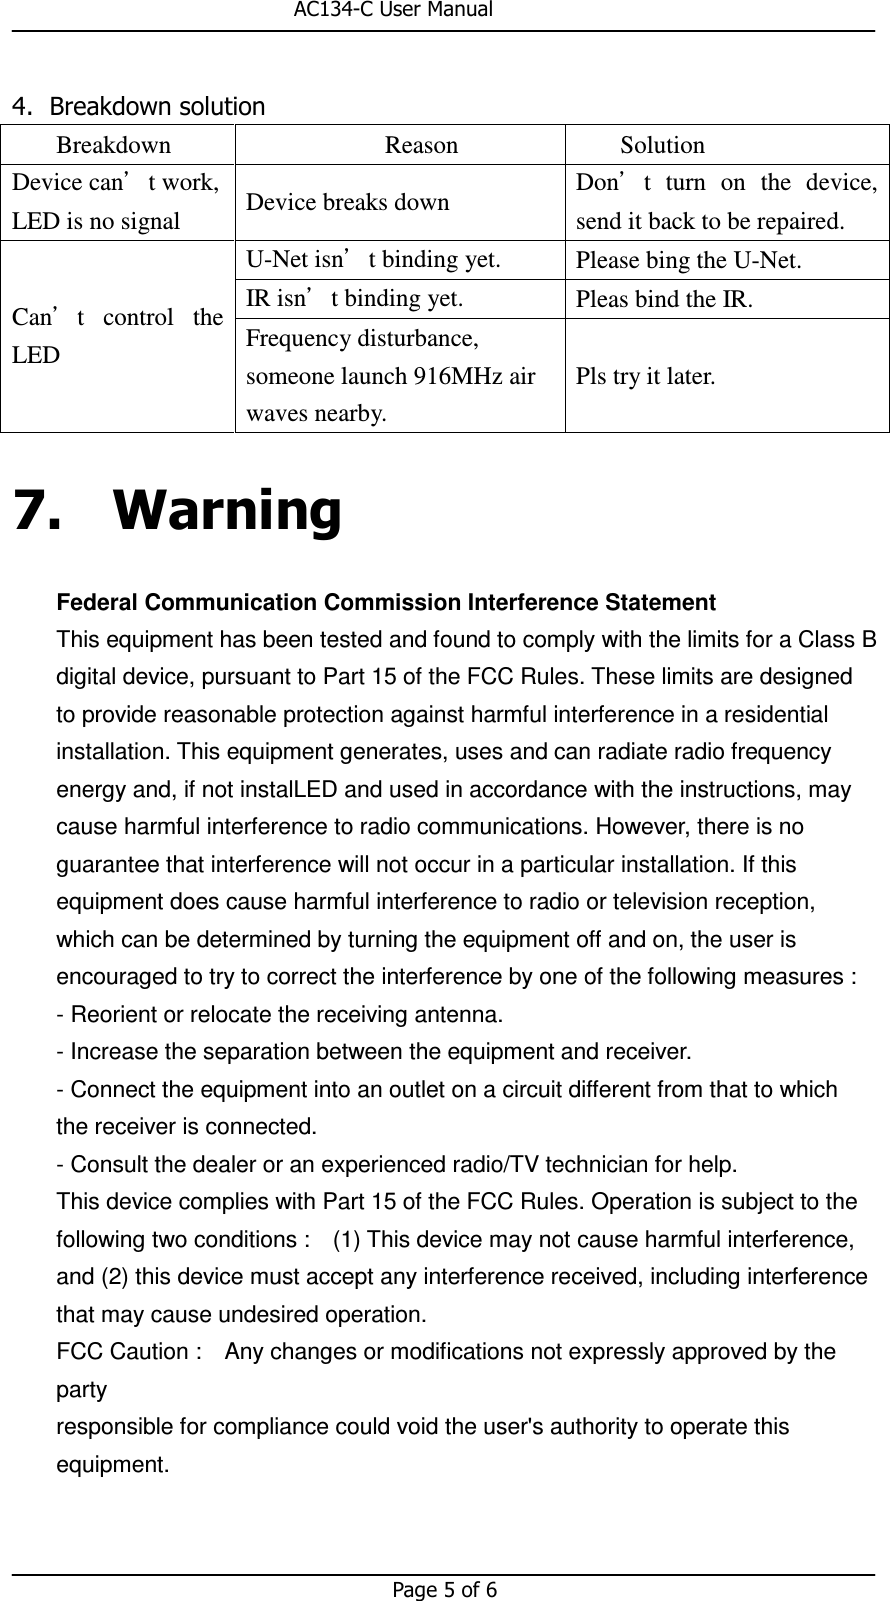                                                       AC134-C User Manual   Page 5 of 6  4. Breakdown solution Breakdown  Reason  Solution Device can’t work, LED is no signal  Device breaks down  Don’t  turn  on  the  device, send it back to be repaired. Can’t  control  the LED U-Net isn’t binding yet.  Please bing the U-Net. IR isn’t binding yet.  Pleas bind the IR. Frequency disturbance, someone launch 916MHz air waves nearby. Pls try it later. 7. Warning Federal Communication Commission Interference Statement This equipment has been tested and found to comply with the limits for a Class B digital device, pursuant to Part 15 of the FCC Rules. These limits are designed to provide reasonable protection against harmful interference in a residential installation. This equipment generates, uses and can radiate radio frequency energy and, if not instalLED and used in accordance with the instructions, may cause harmful interference to radio communications. However, there is no guarantee that interference will not occur in a particular installation. If this equipment does cause harmful interference to radio or television reception, which can be determined by turning the equipment off and on, the user is encouraged to try to correct the interference by one of the following measures :   - Reorient or relocate the receiving antenna. - Increase the separation between the equipment and receiver. - Connect the equipment into an outlet on a circuit different from that to which the receiver is connected. - Consult the dealer or an experienced radio/TV technician for help. This device complies with Part 15 of the FCC Rules. Operation is subject to the following two conditions :    (1) This device may not cause harmful interference, and (2) this device must accept any interference received, including interference that may cause undesired operation. FCC Caution :    Any changes or modifications not expressly approved by the party responsible for compliance could void the user&apos;s authority to operate this equipment.   